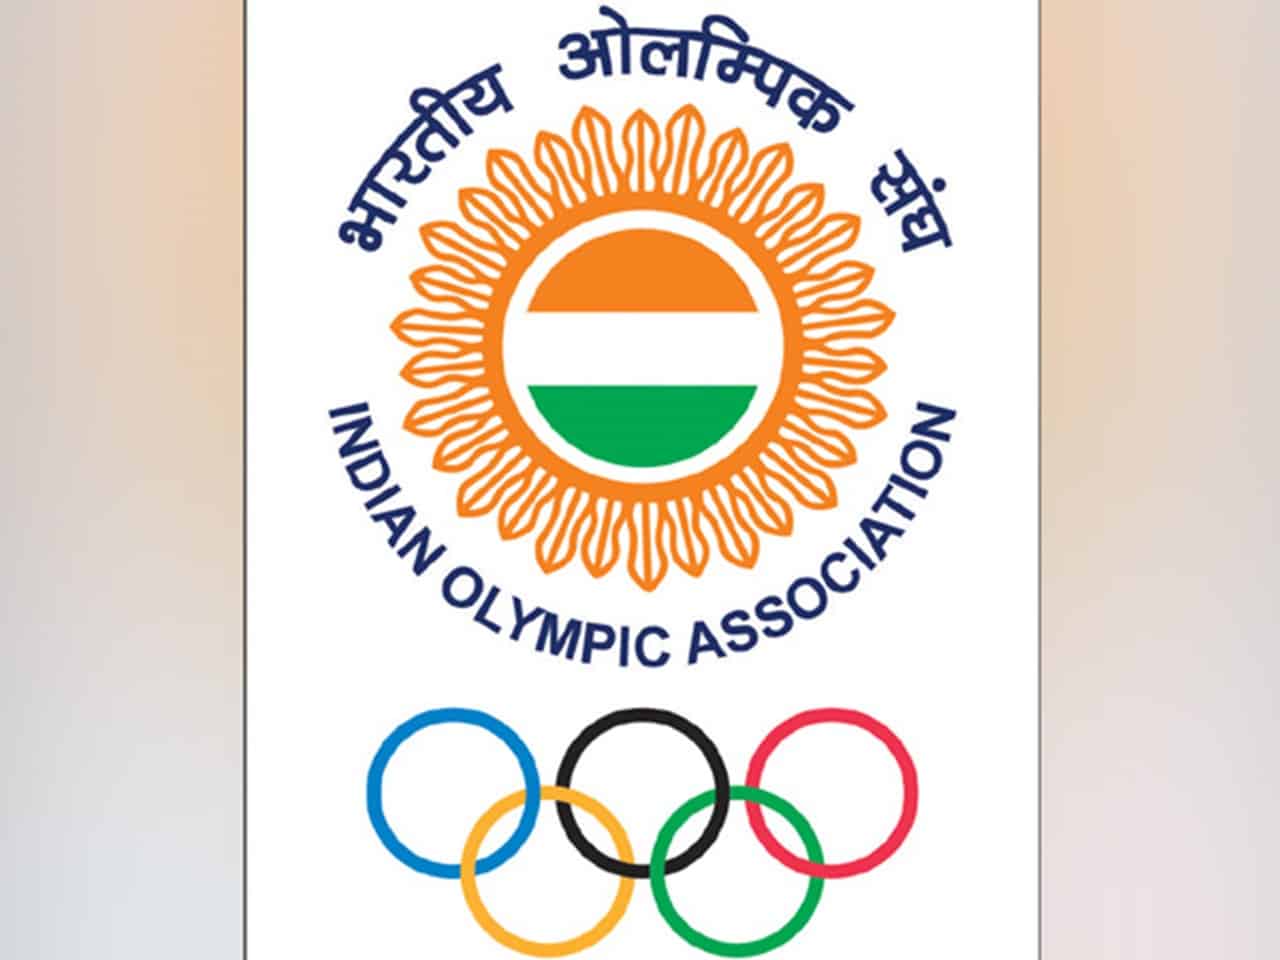 CWG 2022: Union Sports Ministry gives in-principle approval to hold shooting, archery events in India